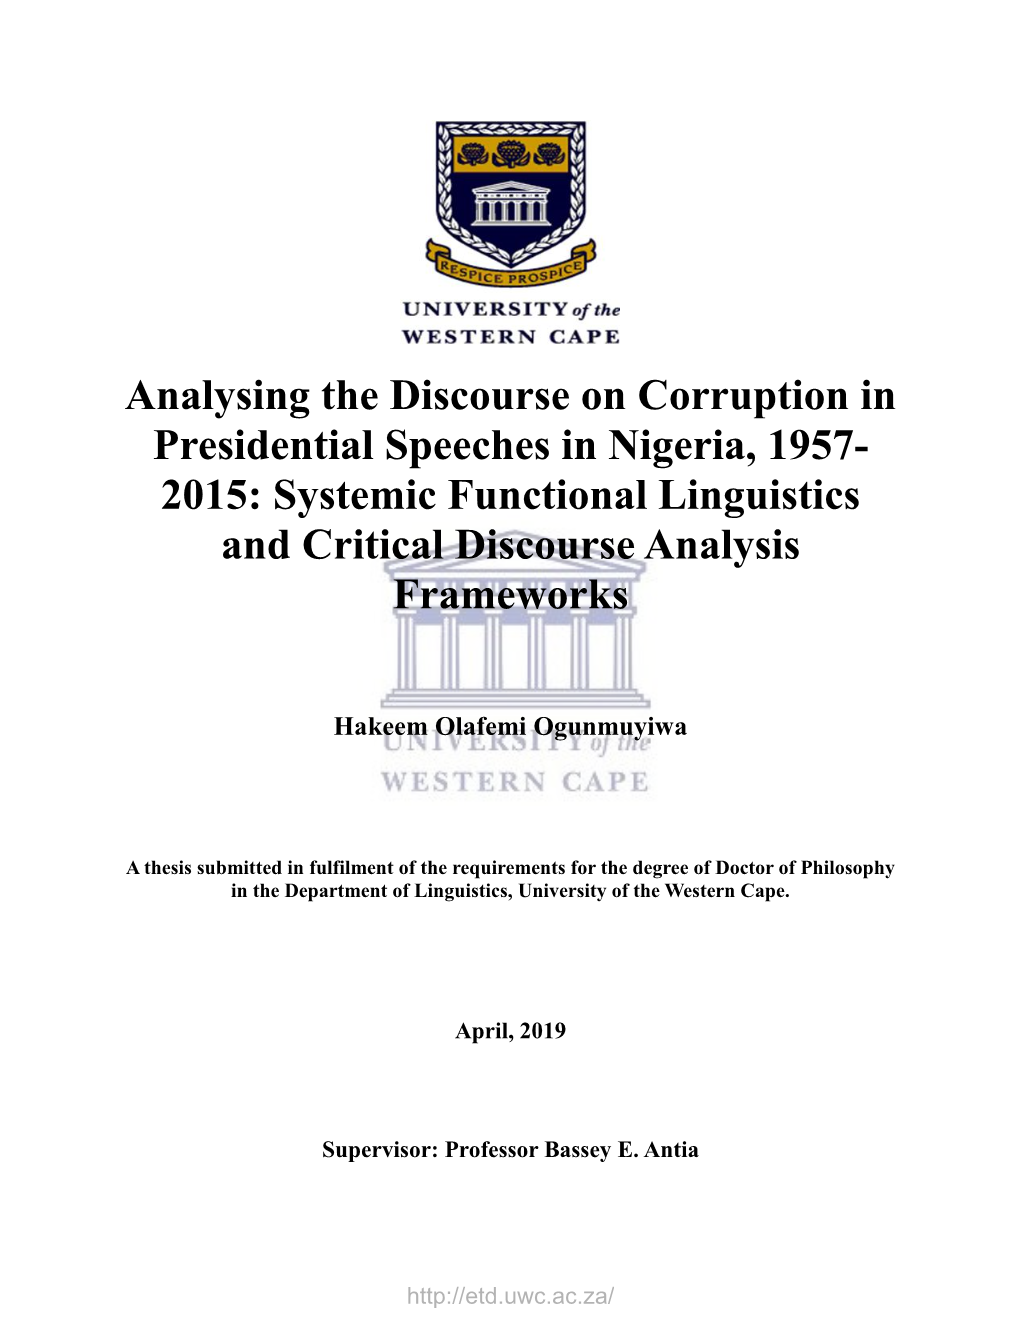 Analysing the Discourse on Corruption in Presidential Speeches in Nigeria, 1957- 2015: Systemic Functional Linguistics and Critical Discourse Analysis Frameworks